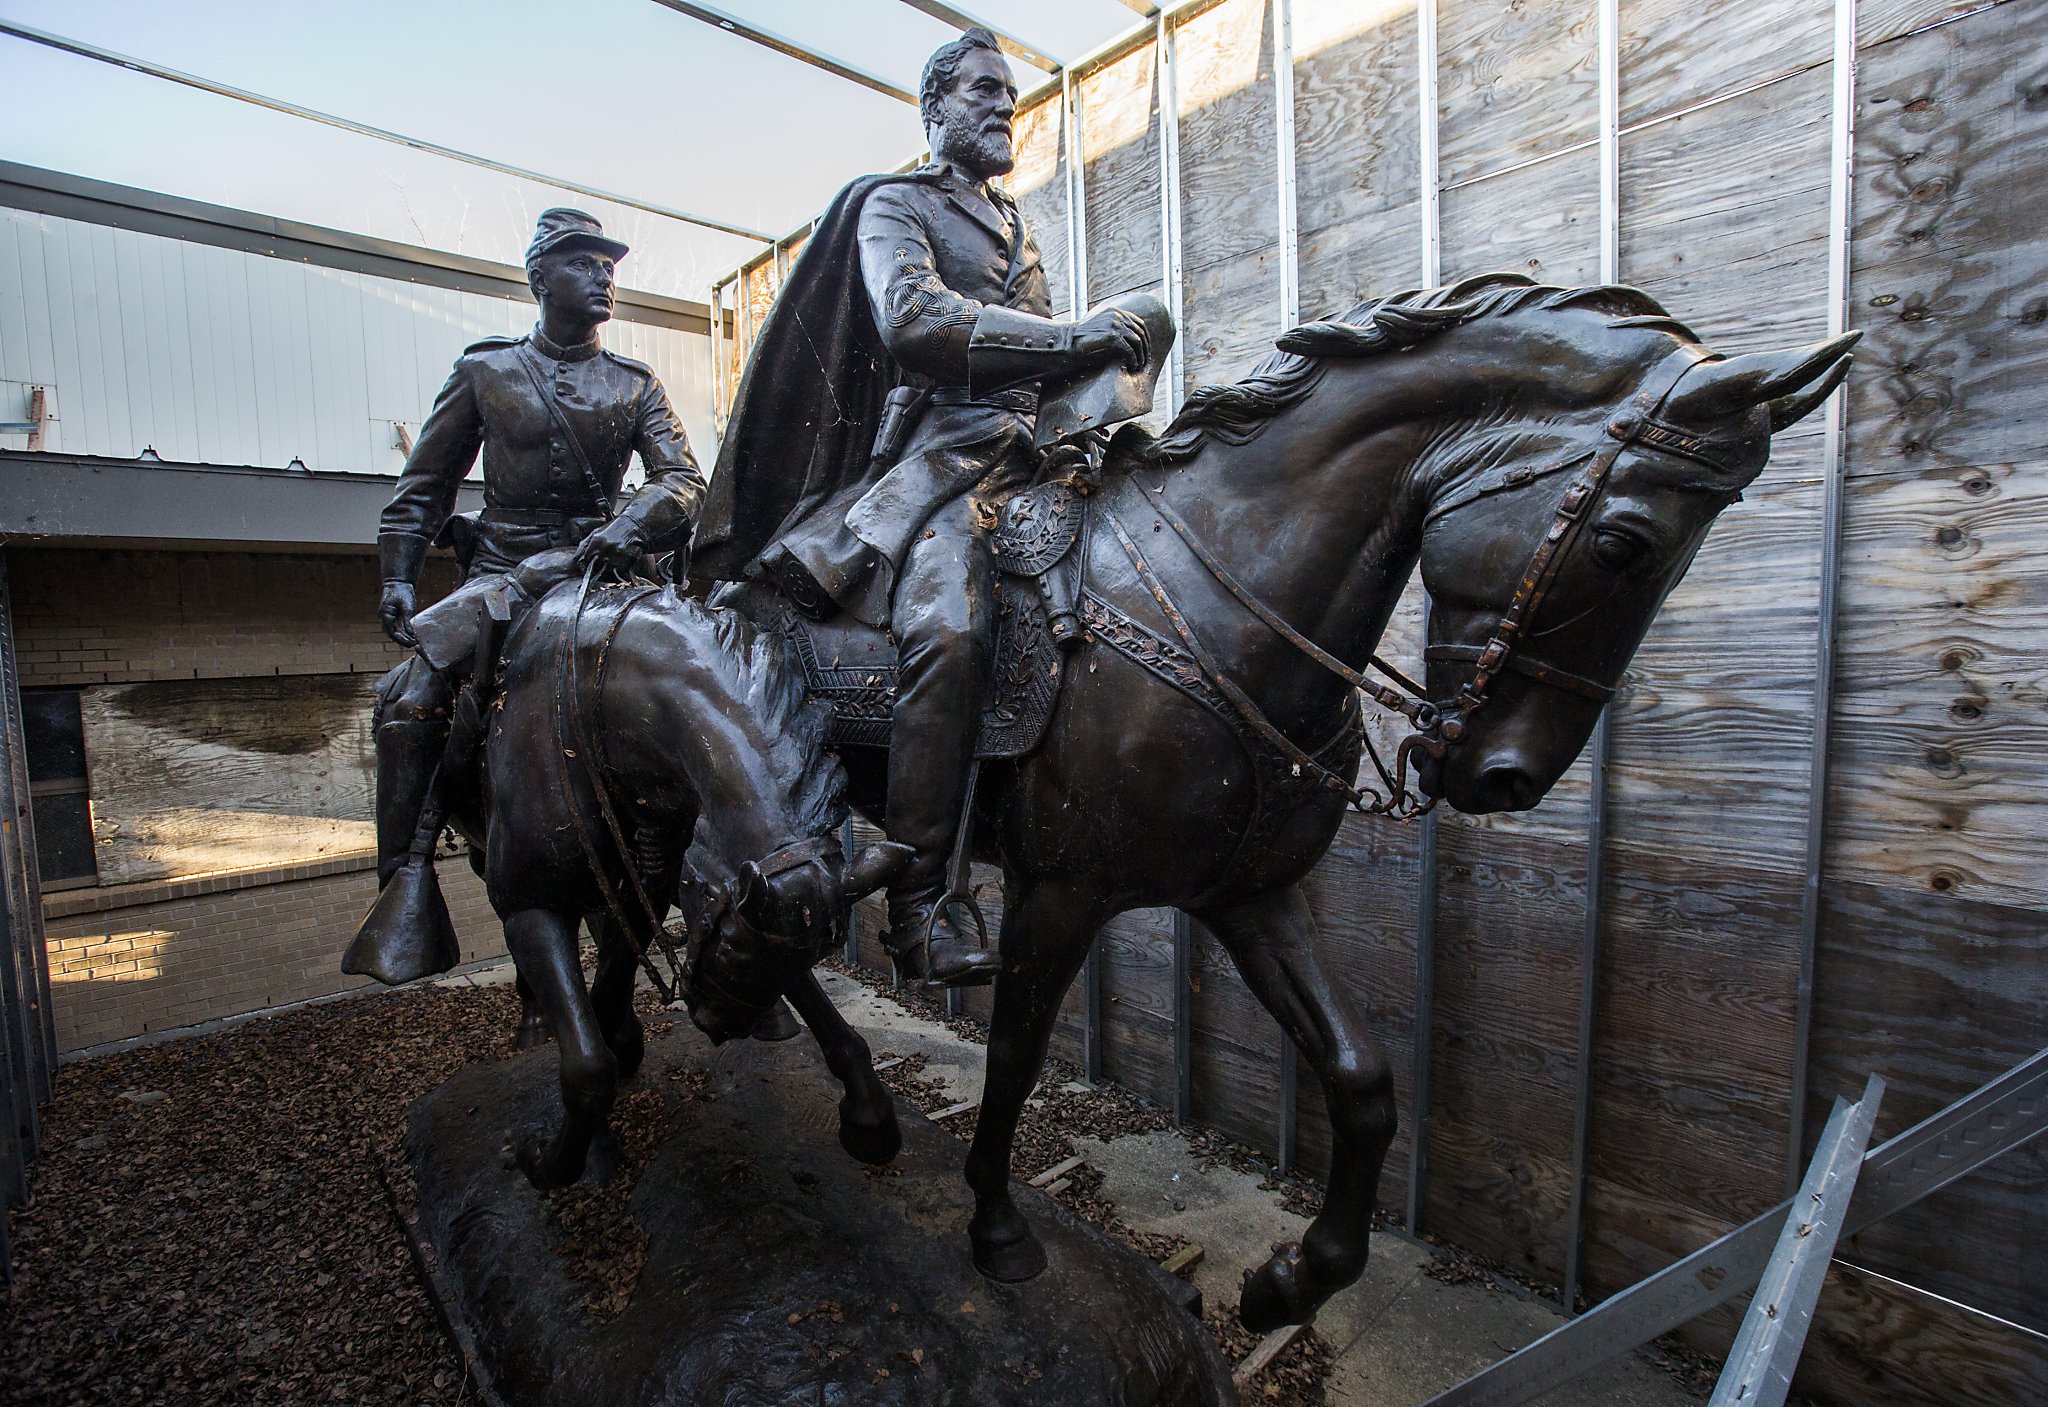 West Texas luxury resort says it's proud to display Robert E. Lee statue  removed from Dallas park